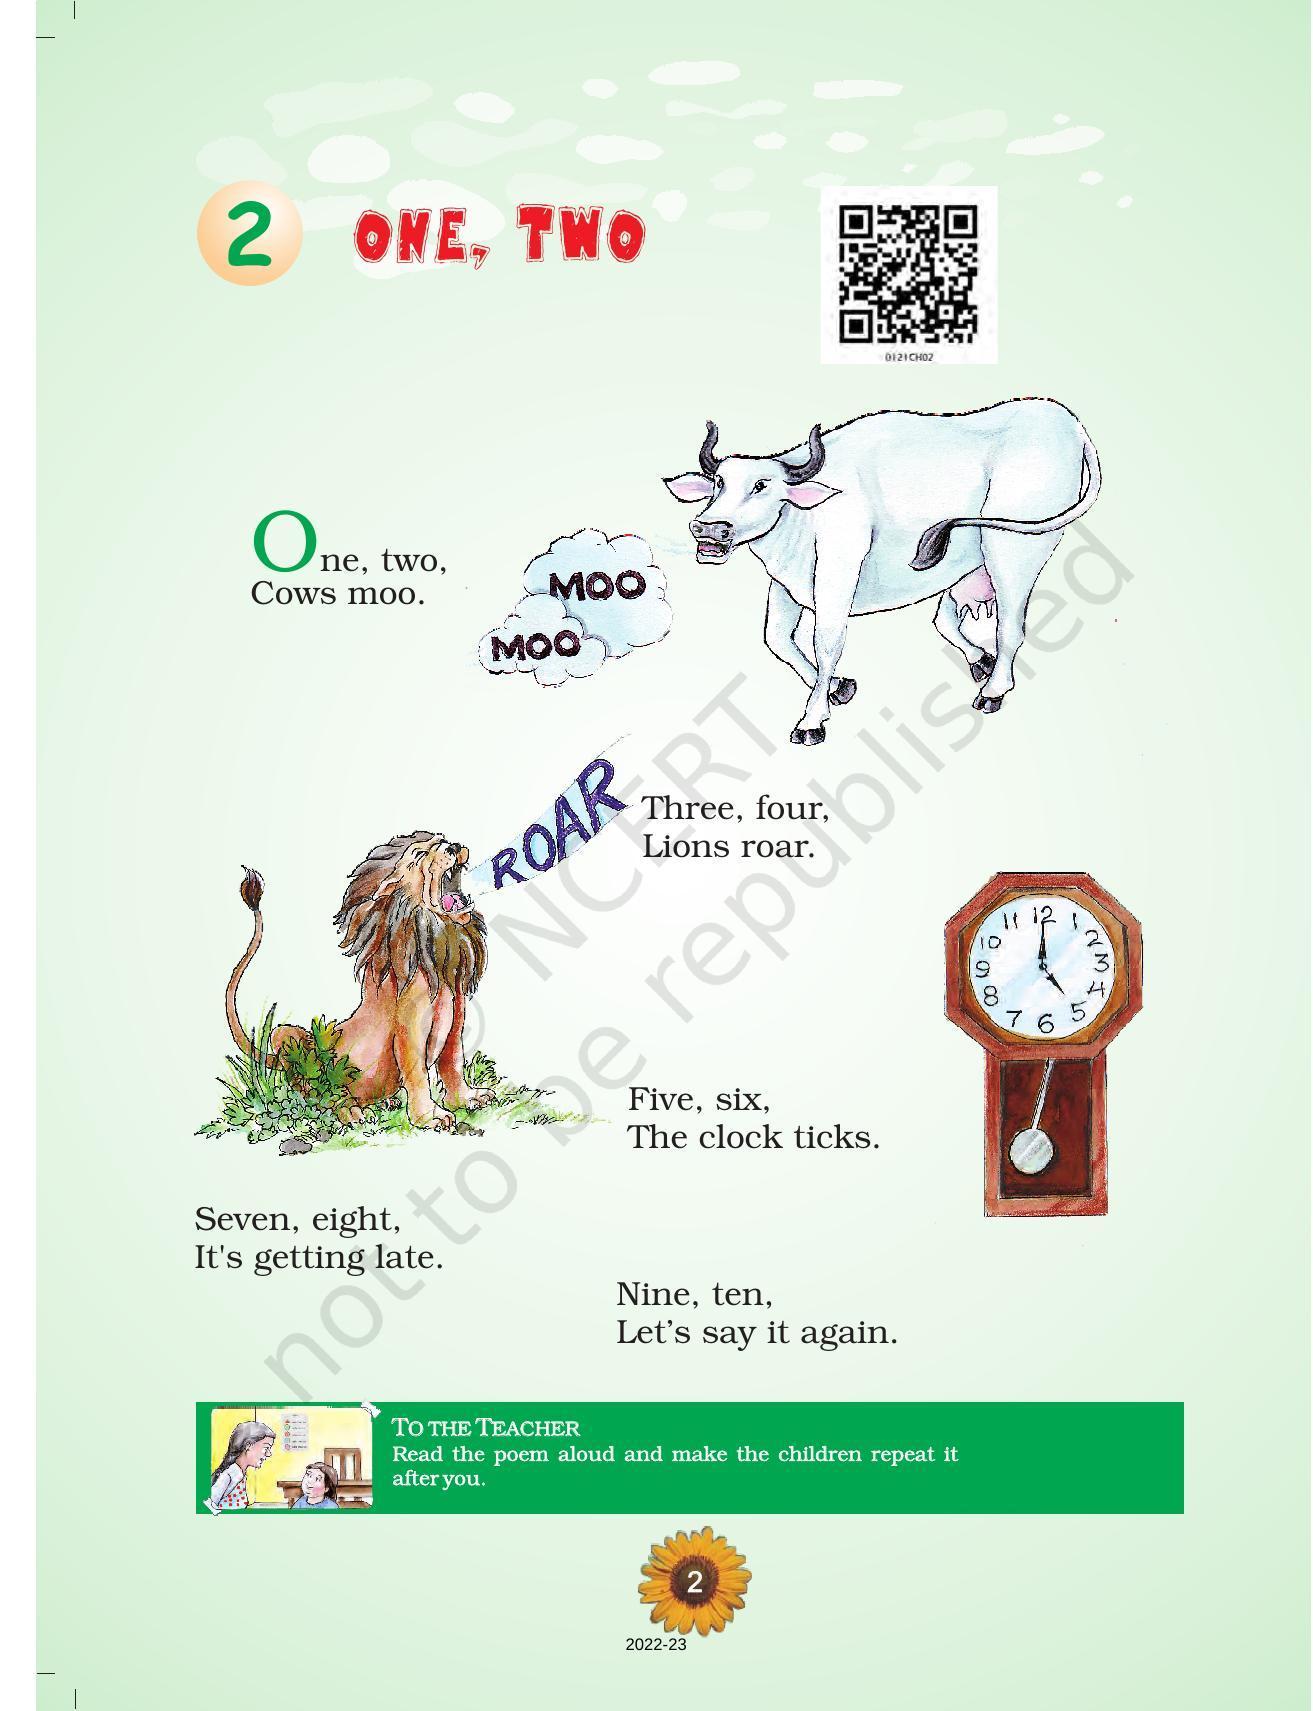 NCERT Book for Class 1 English (Raindrop):Unit 2-One, Two - Page 1